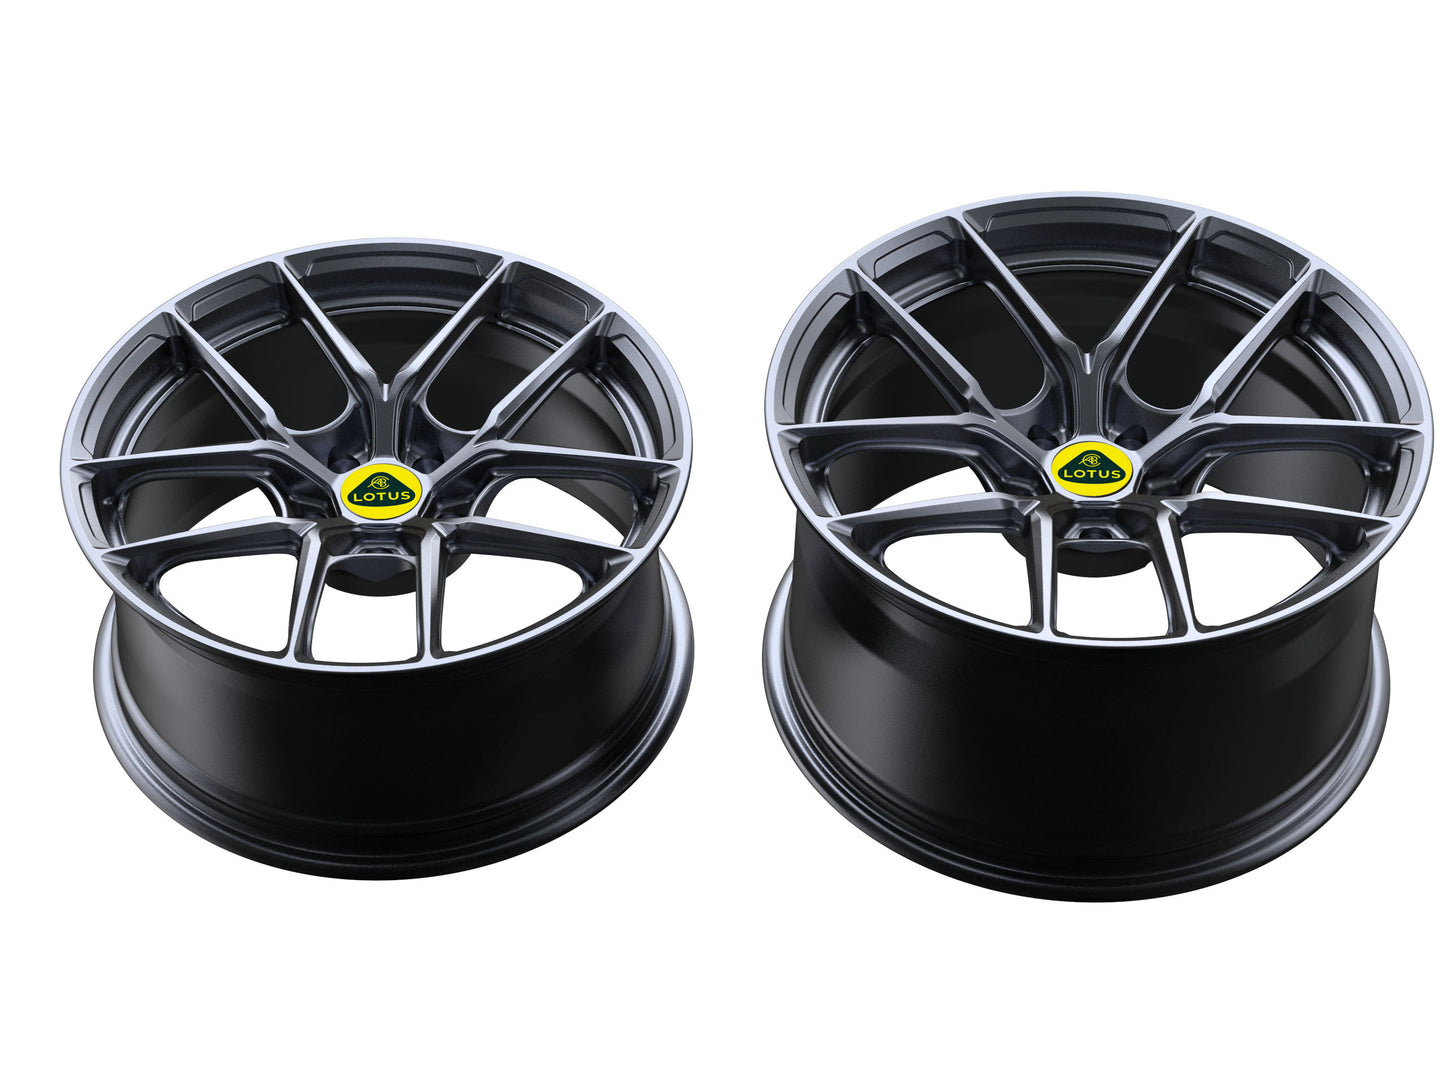 Lotus Ultra-Light Alloy Forged Wheels by Aerie Performance